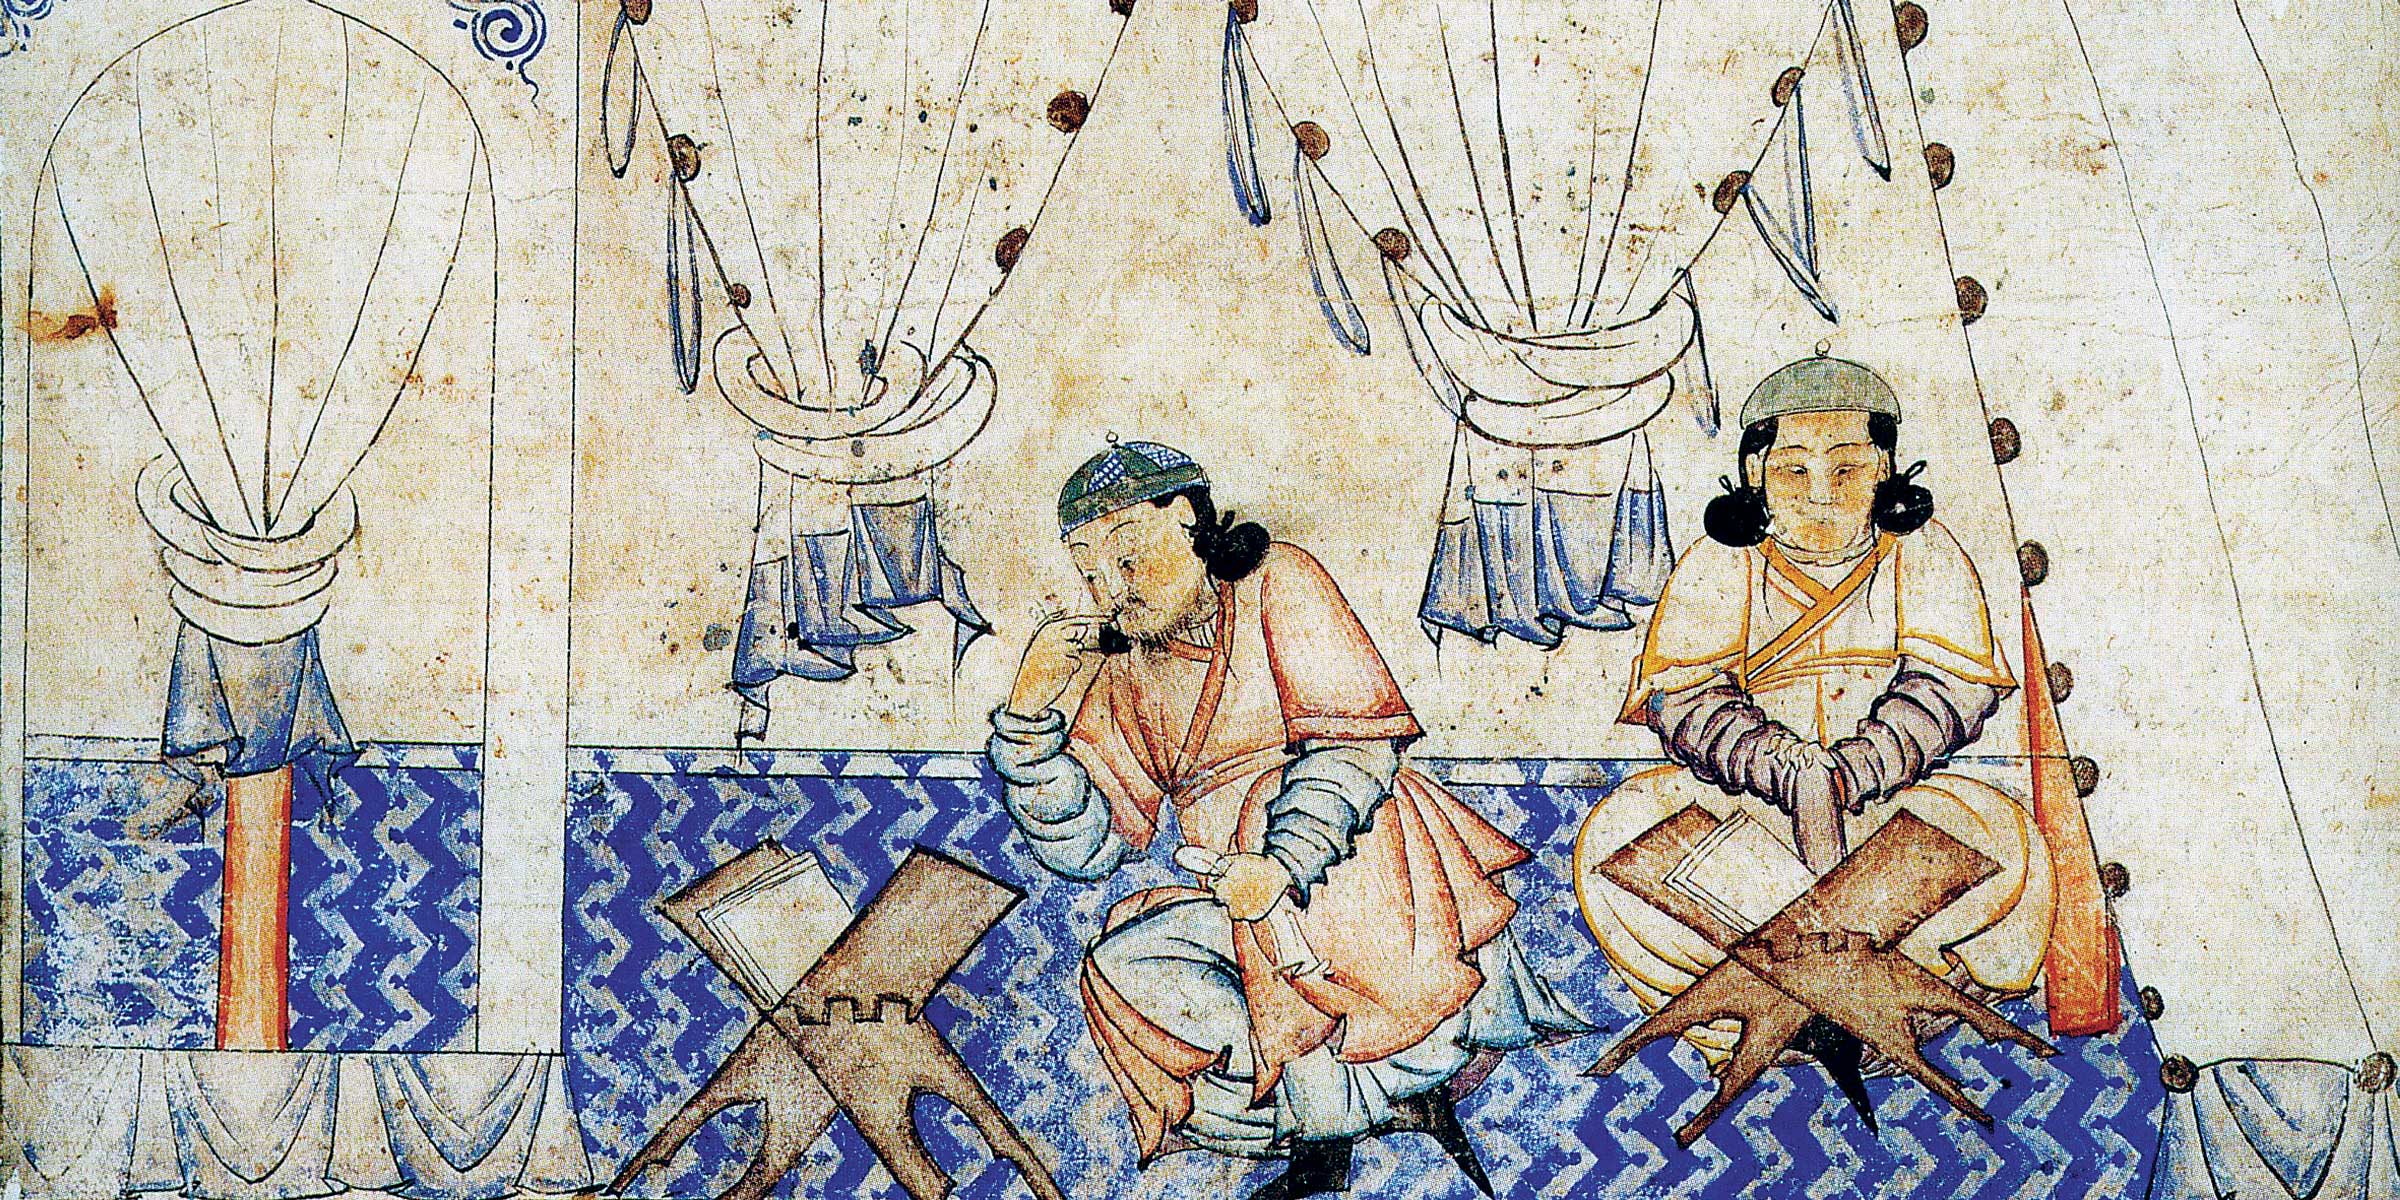 Mongol prince studying the Quran.